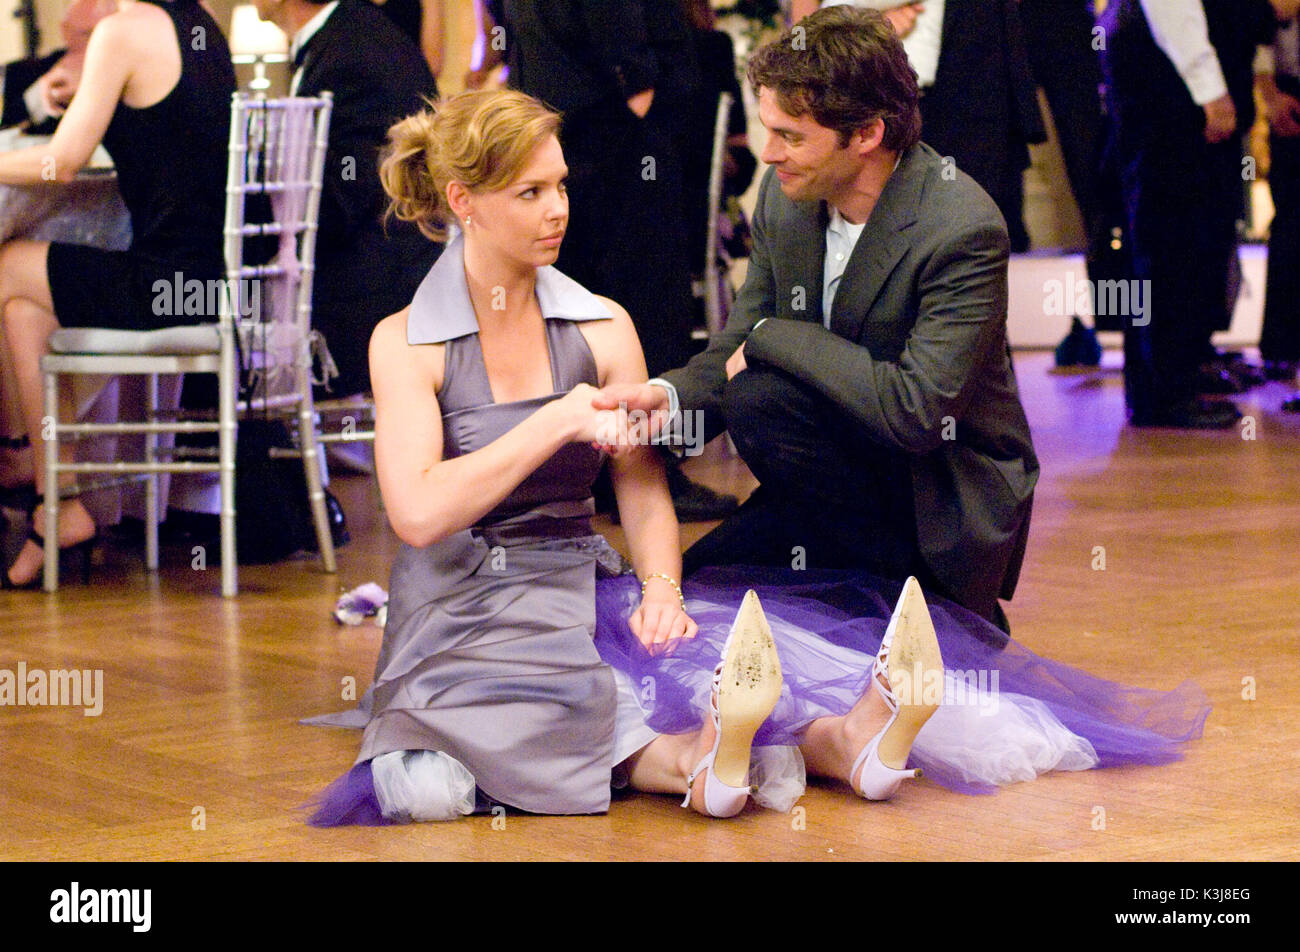 27DKS-007 Newspaper reporter Kevin offers a helping hand to fallen bridesmaid Jane (Katherine Heigl). 27 DRESSES aka TWENTY SEVEN DRESSES KATHERINE HEIGL, JAMES MARSDEN      Date: 2008 Stock Photo